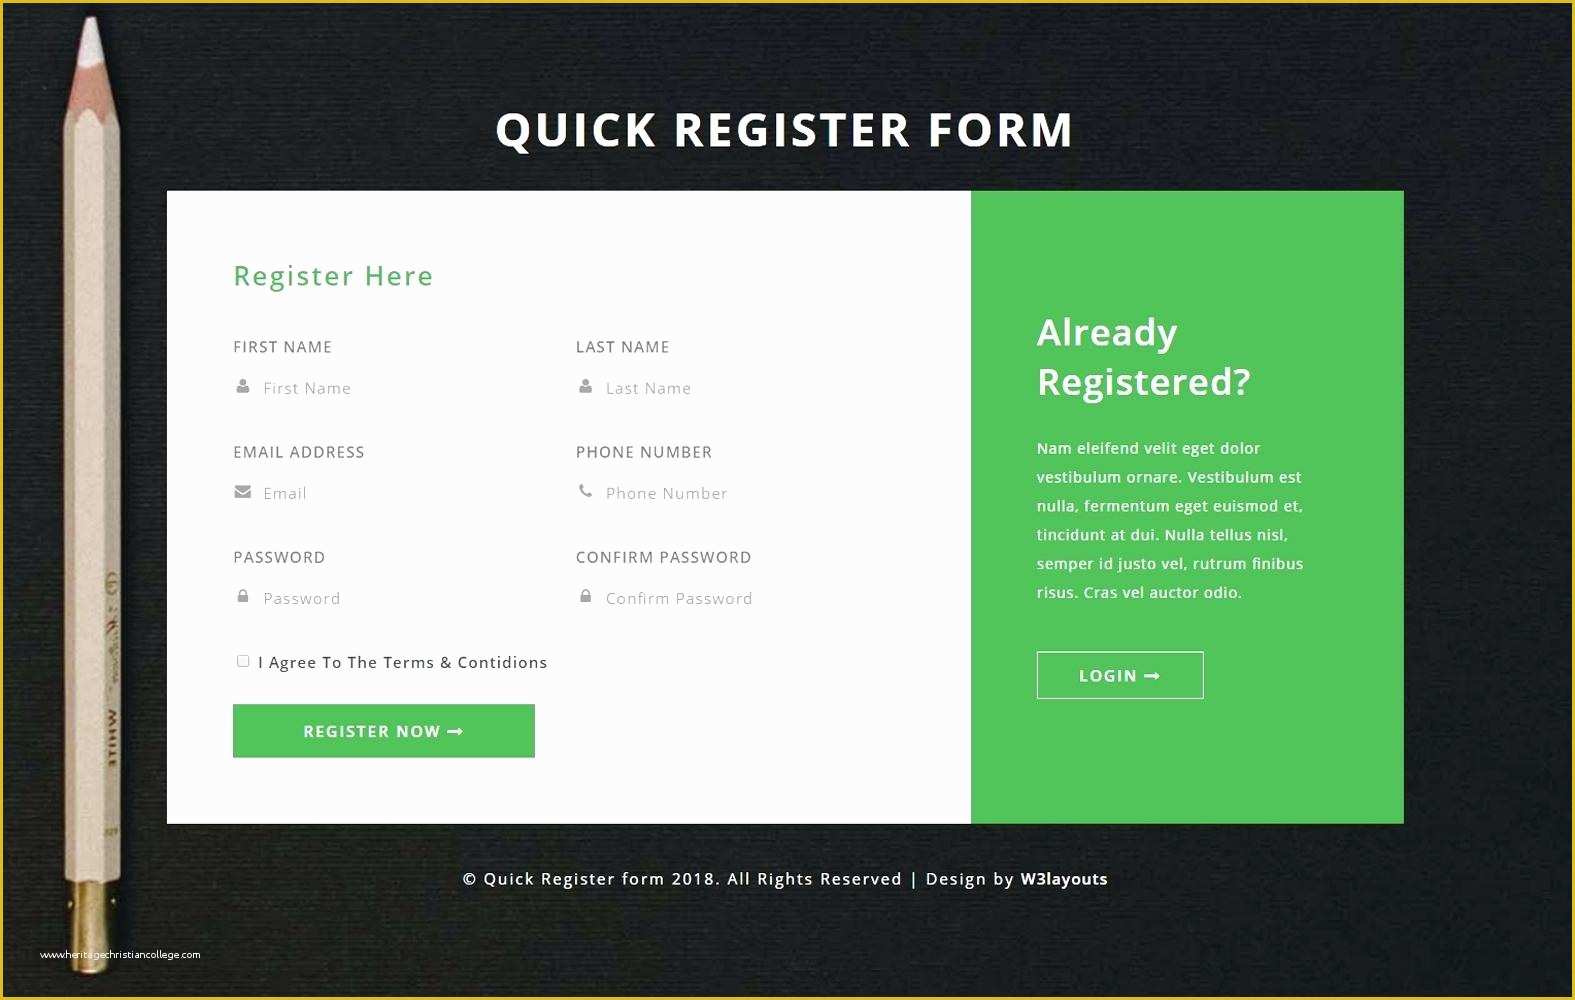 React Website Template Free Of Login form so In This Tutorial I Will Show You How to